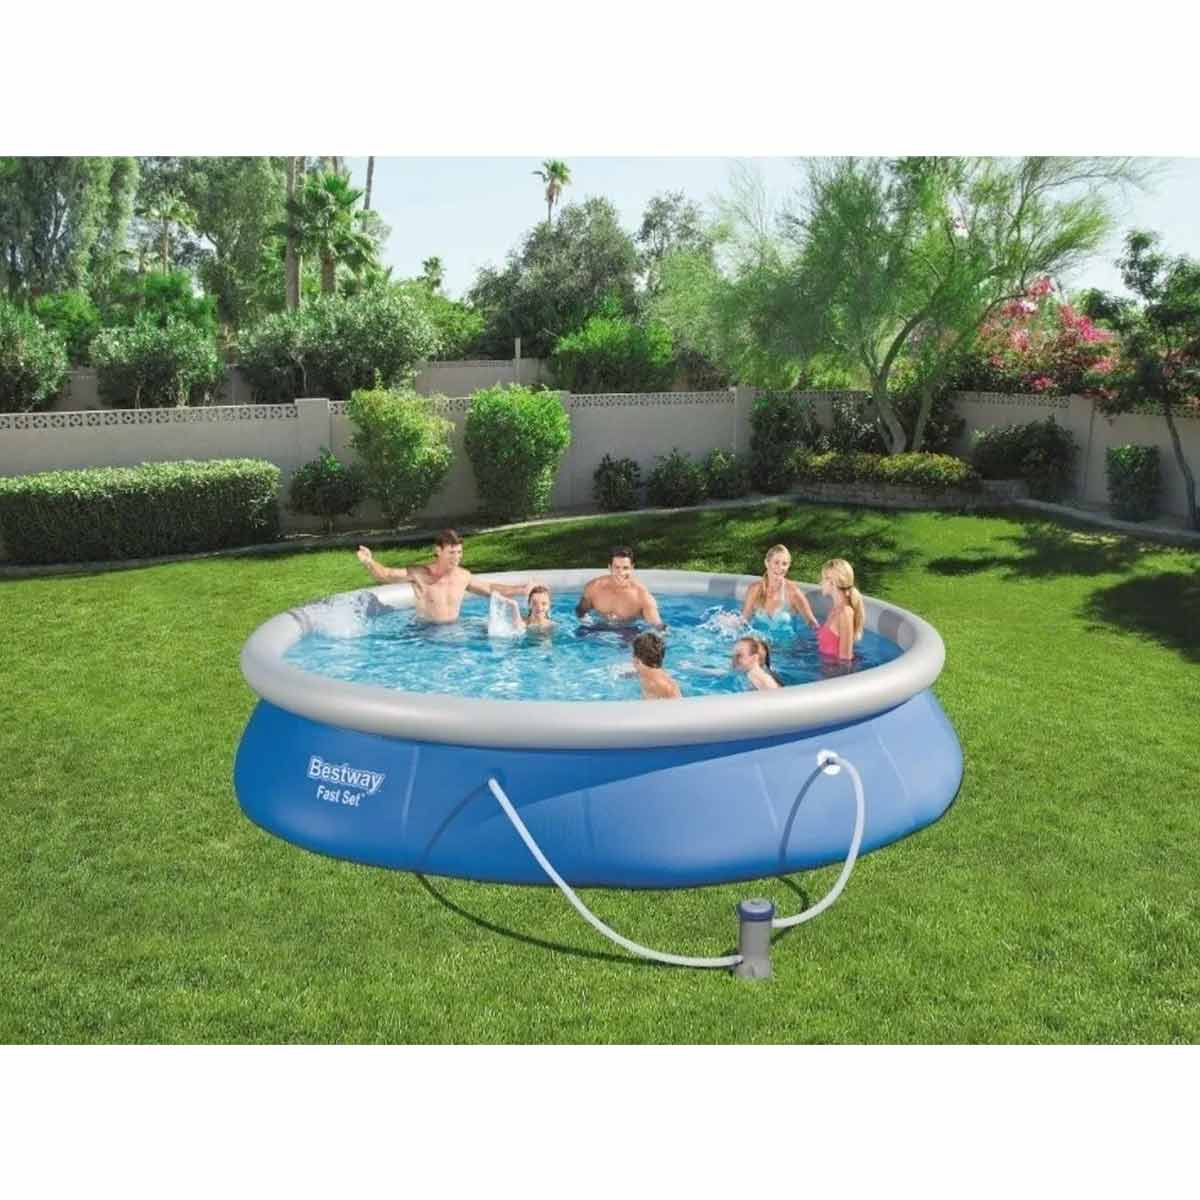 Alberca Inflable Con Bomba Circular Fastset 457 Cm Bestway